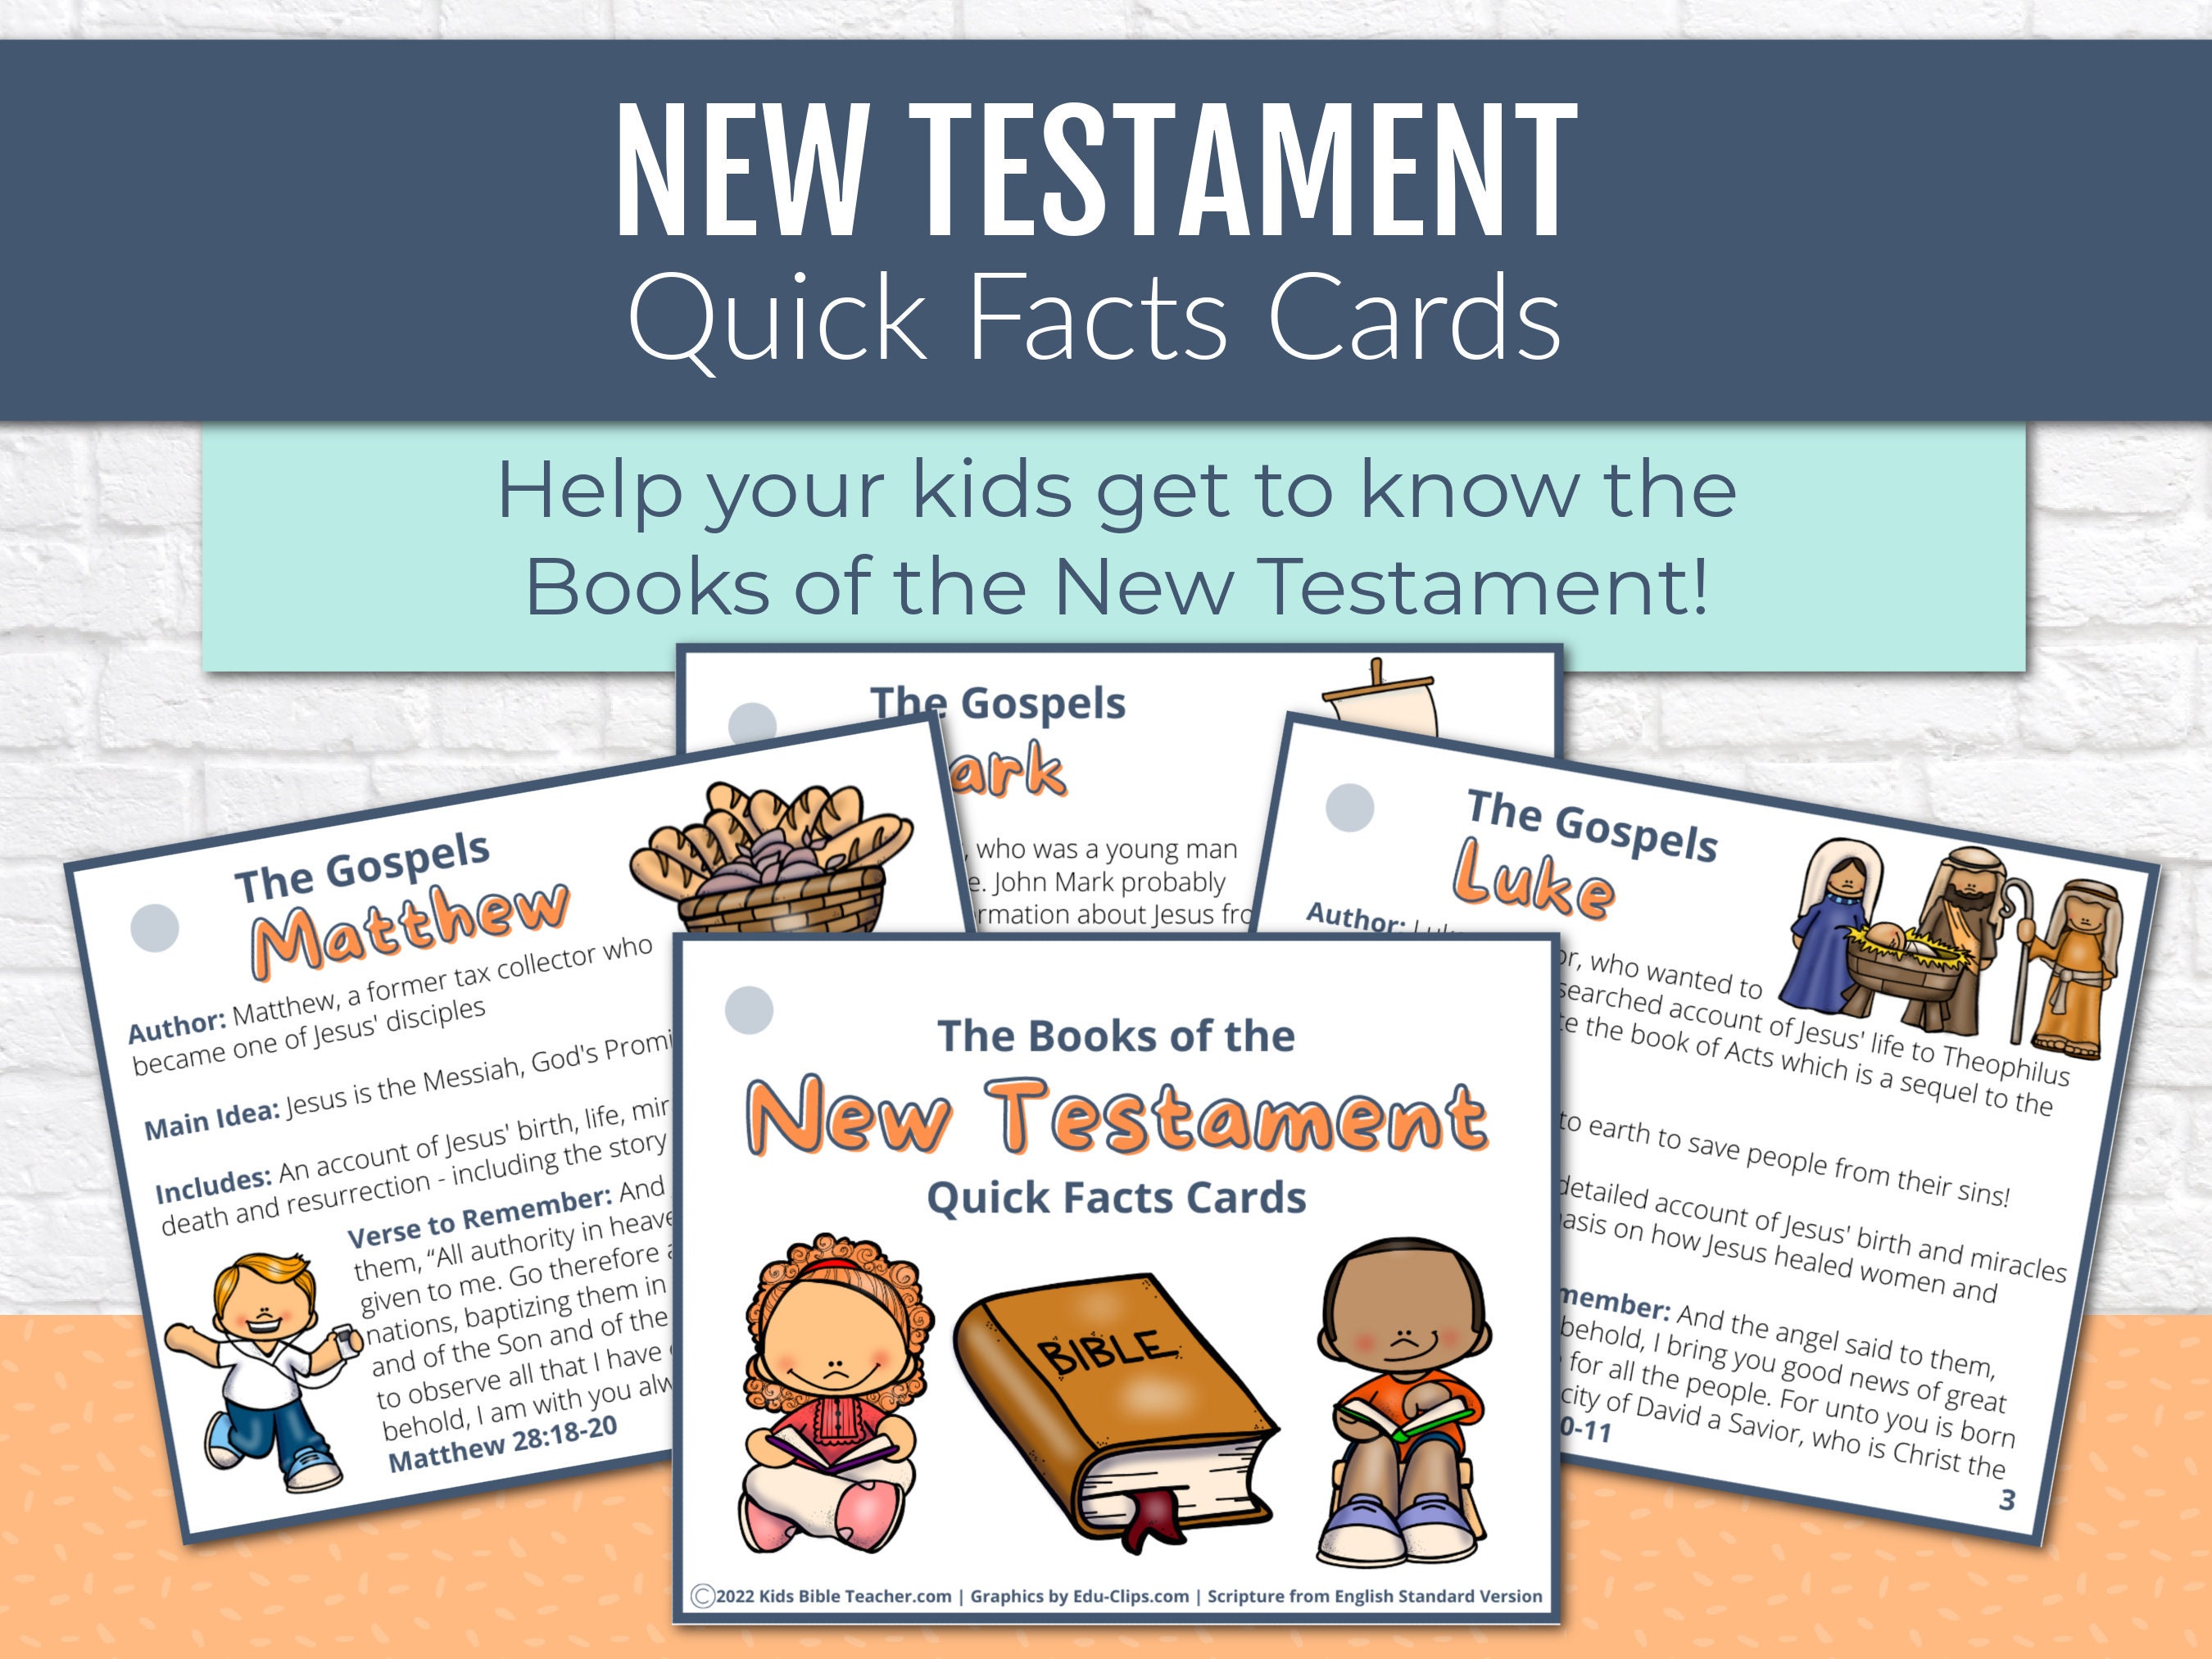 Books of the Bible Flip Book, Old and New Testament, 66 Books, Bible  Memorization, Sunday School, Christian Resources 